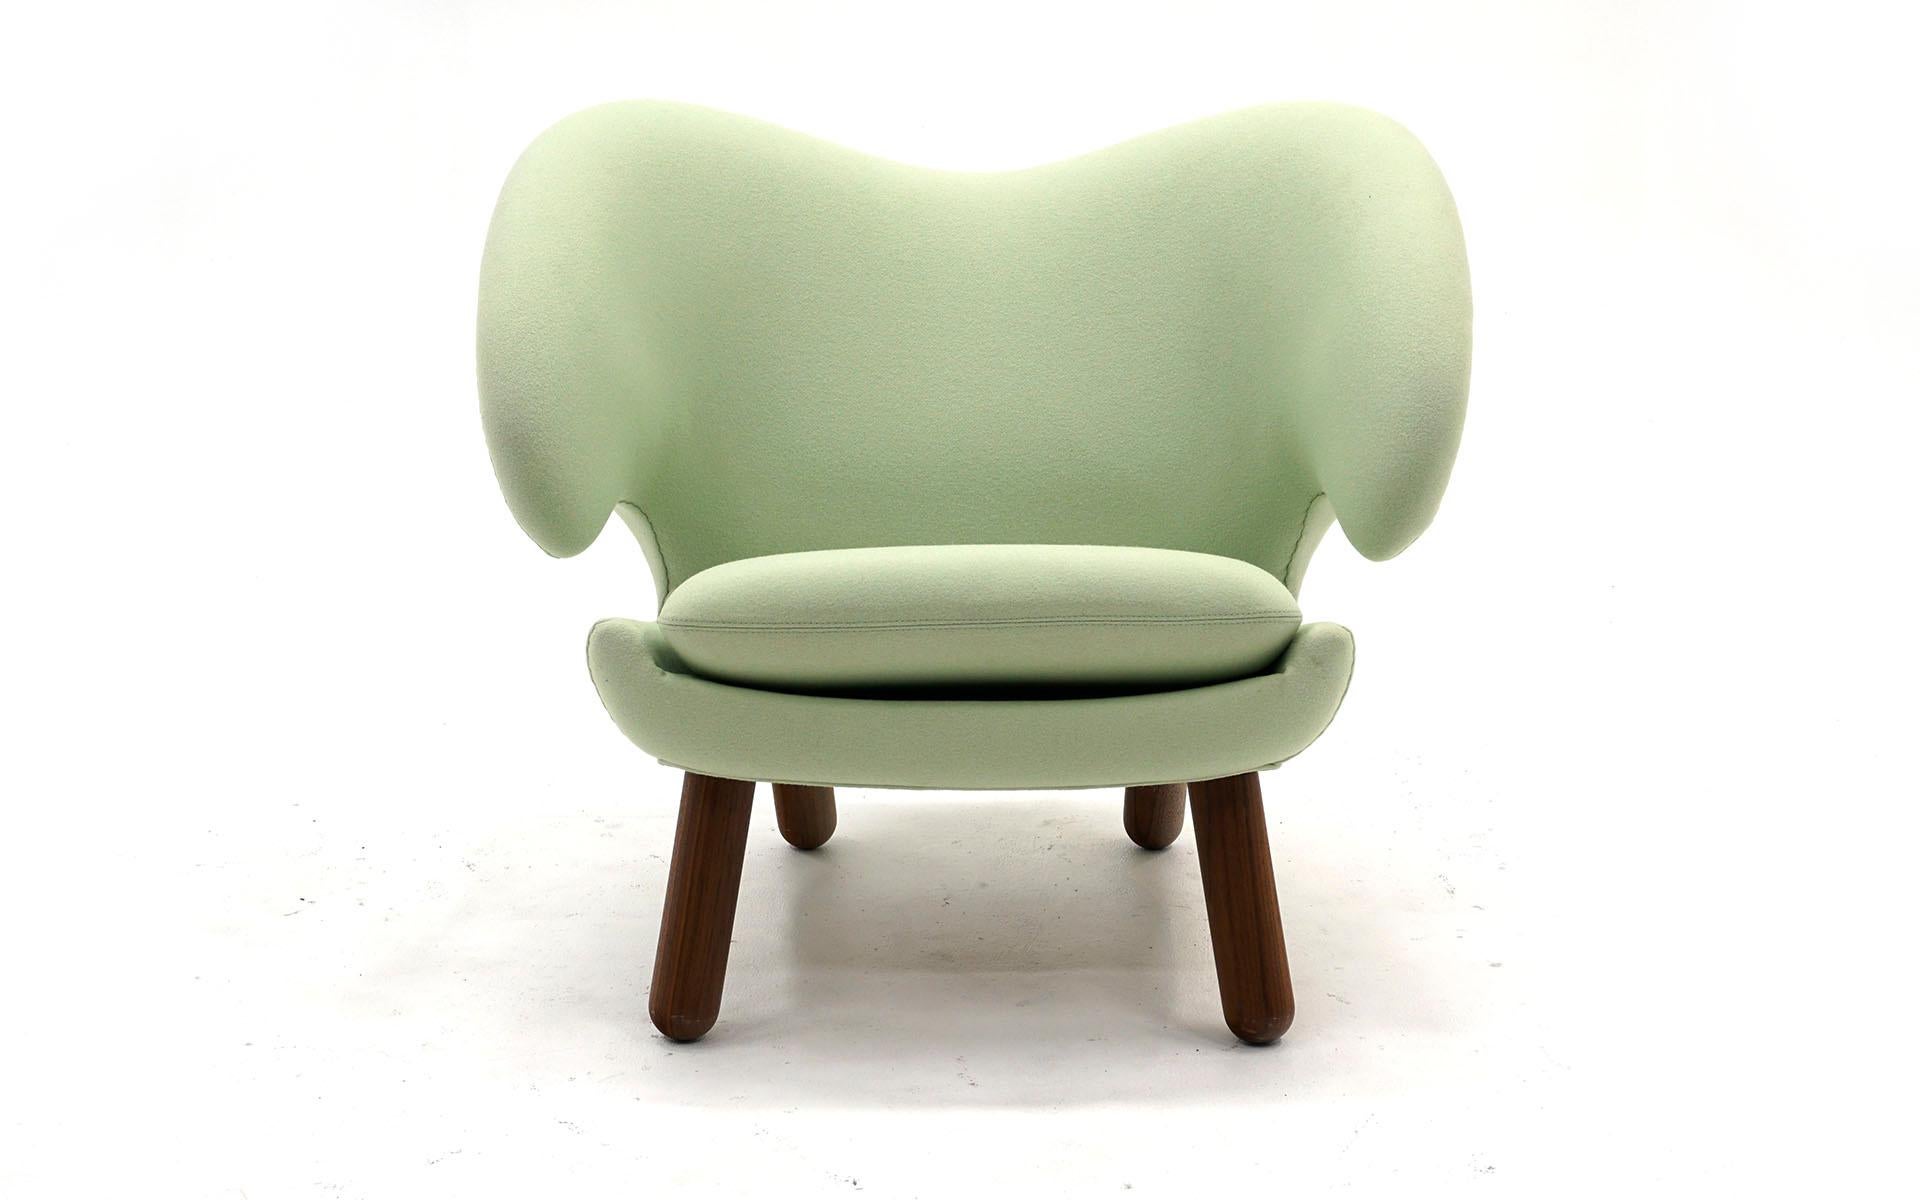 Licensed production Pelican chair designed by Finn Juhl, manufactured by OneCollection, Denmark. This lounge chair is in like new condition. Signed with the Onecollection label. Very comfortable.